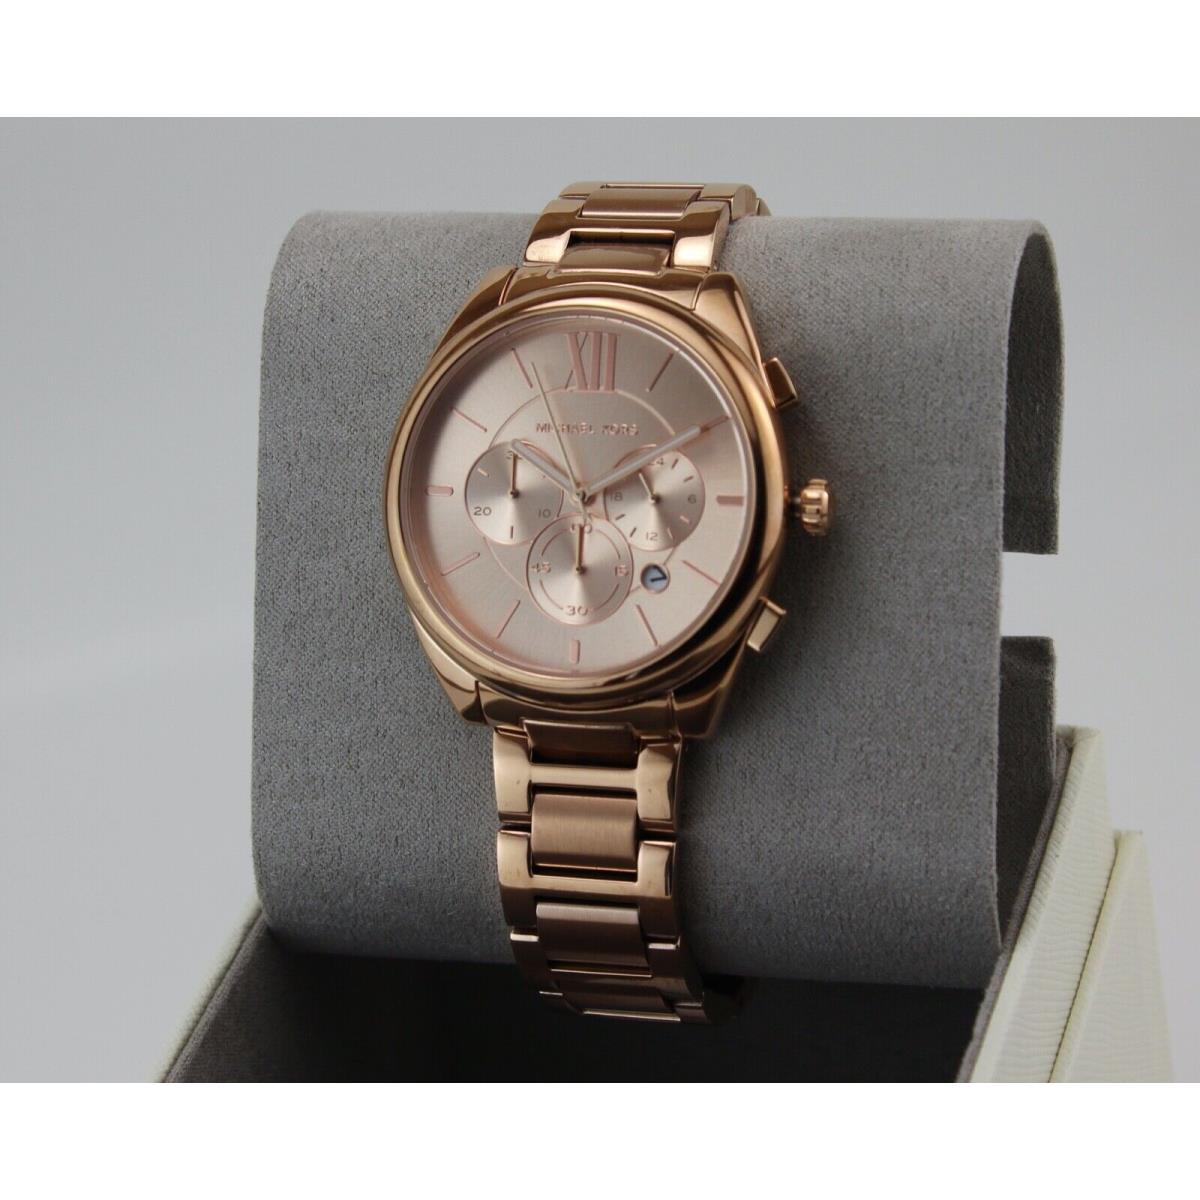 Michael Kors watch Janelle - Rose Gold Dial, Rose Gold Band